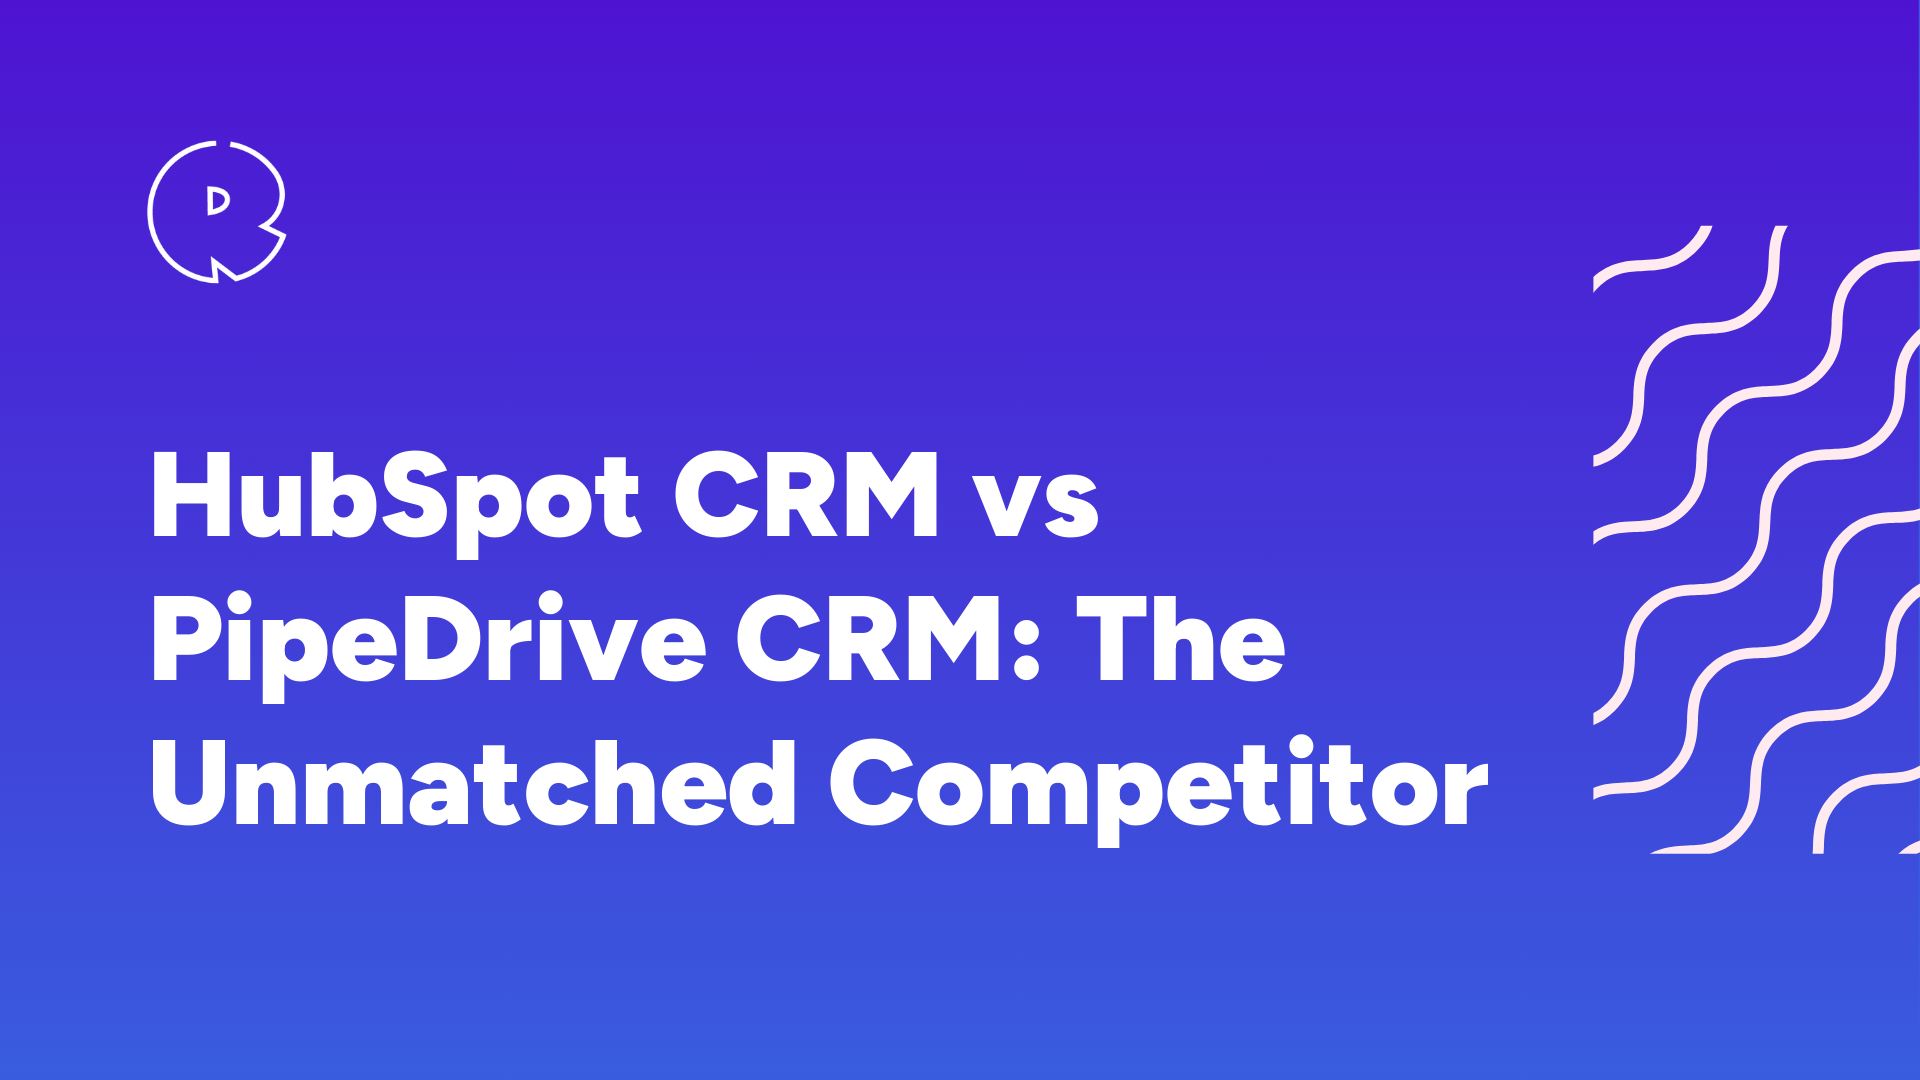 HubSpot CRM vs PipeDrive CRM: The Unmatched Competitor